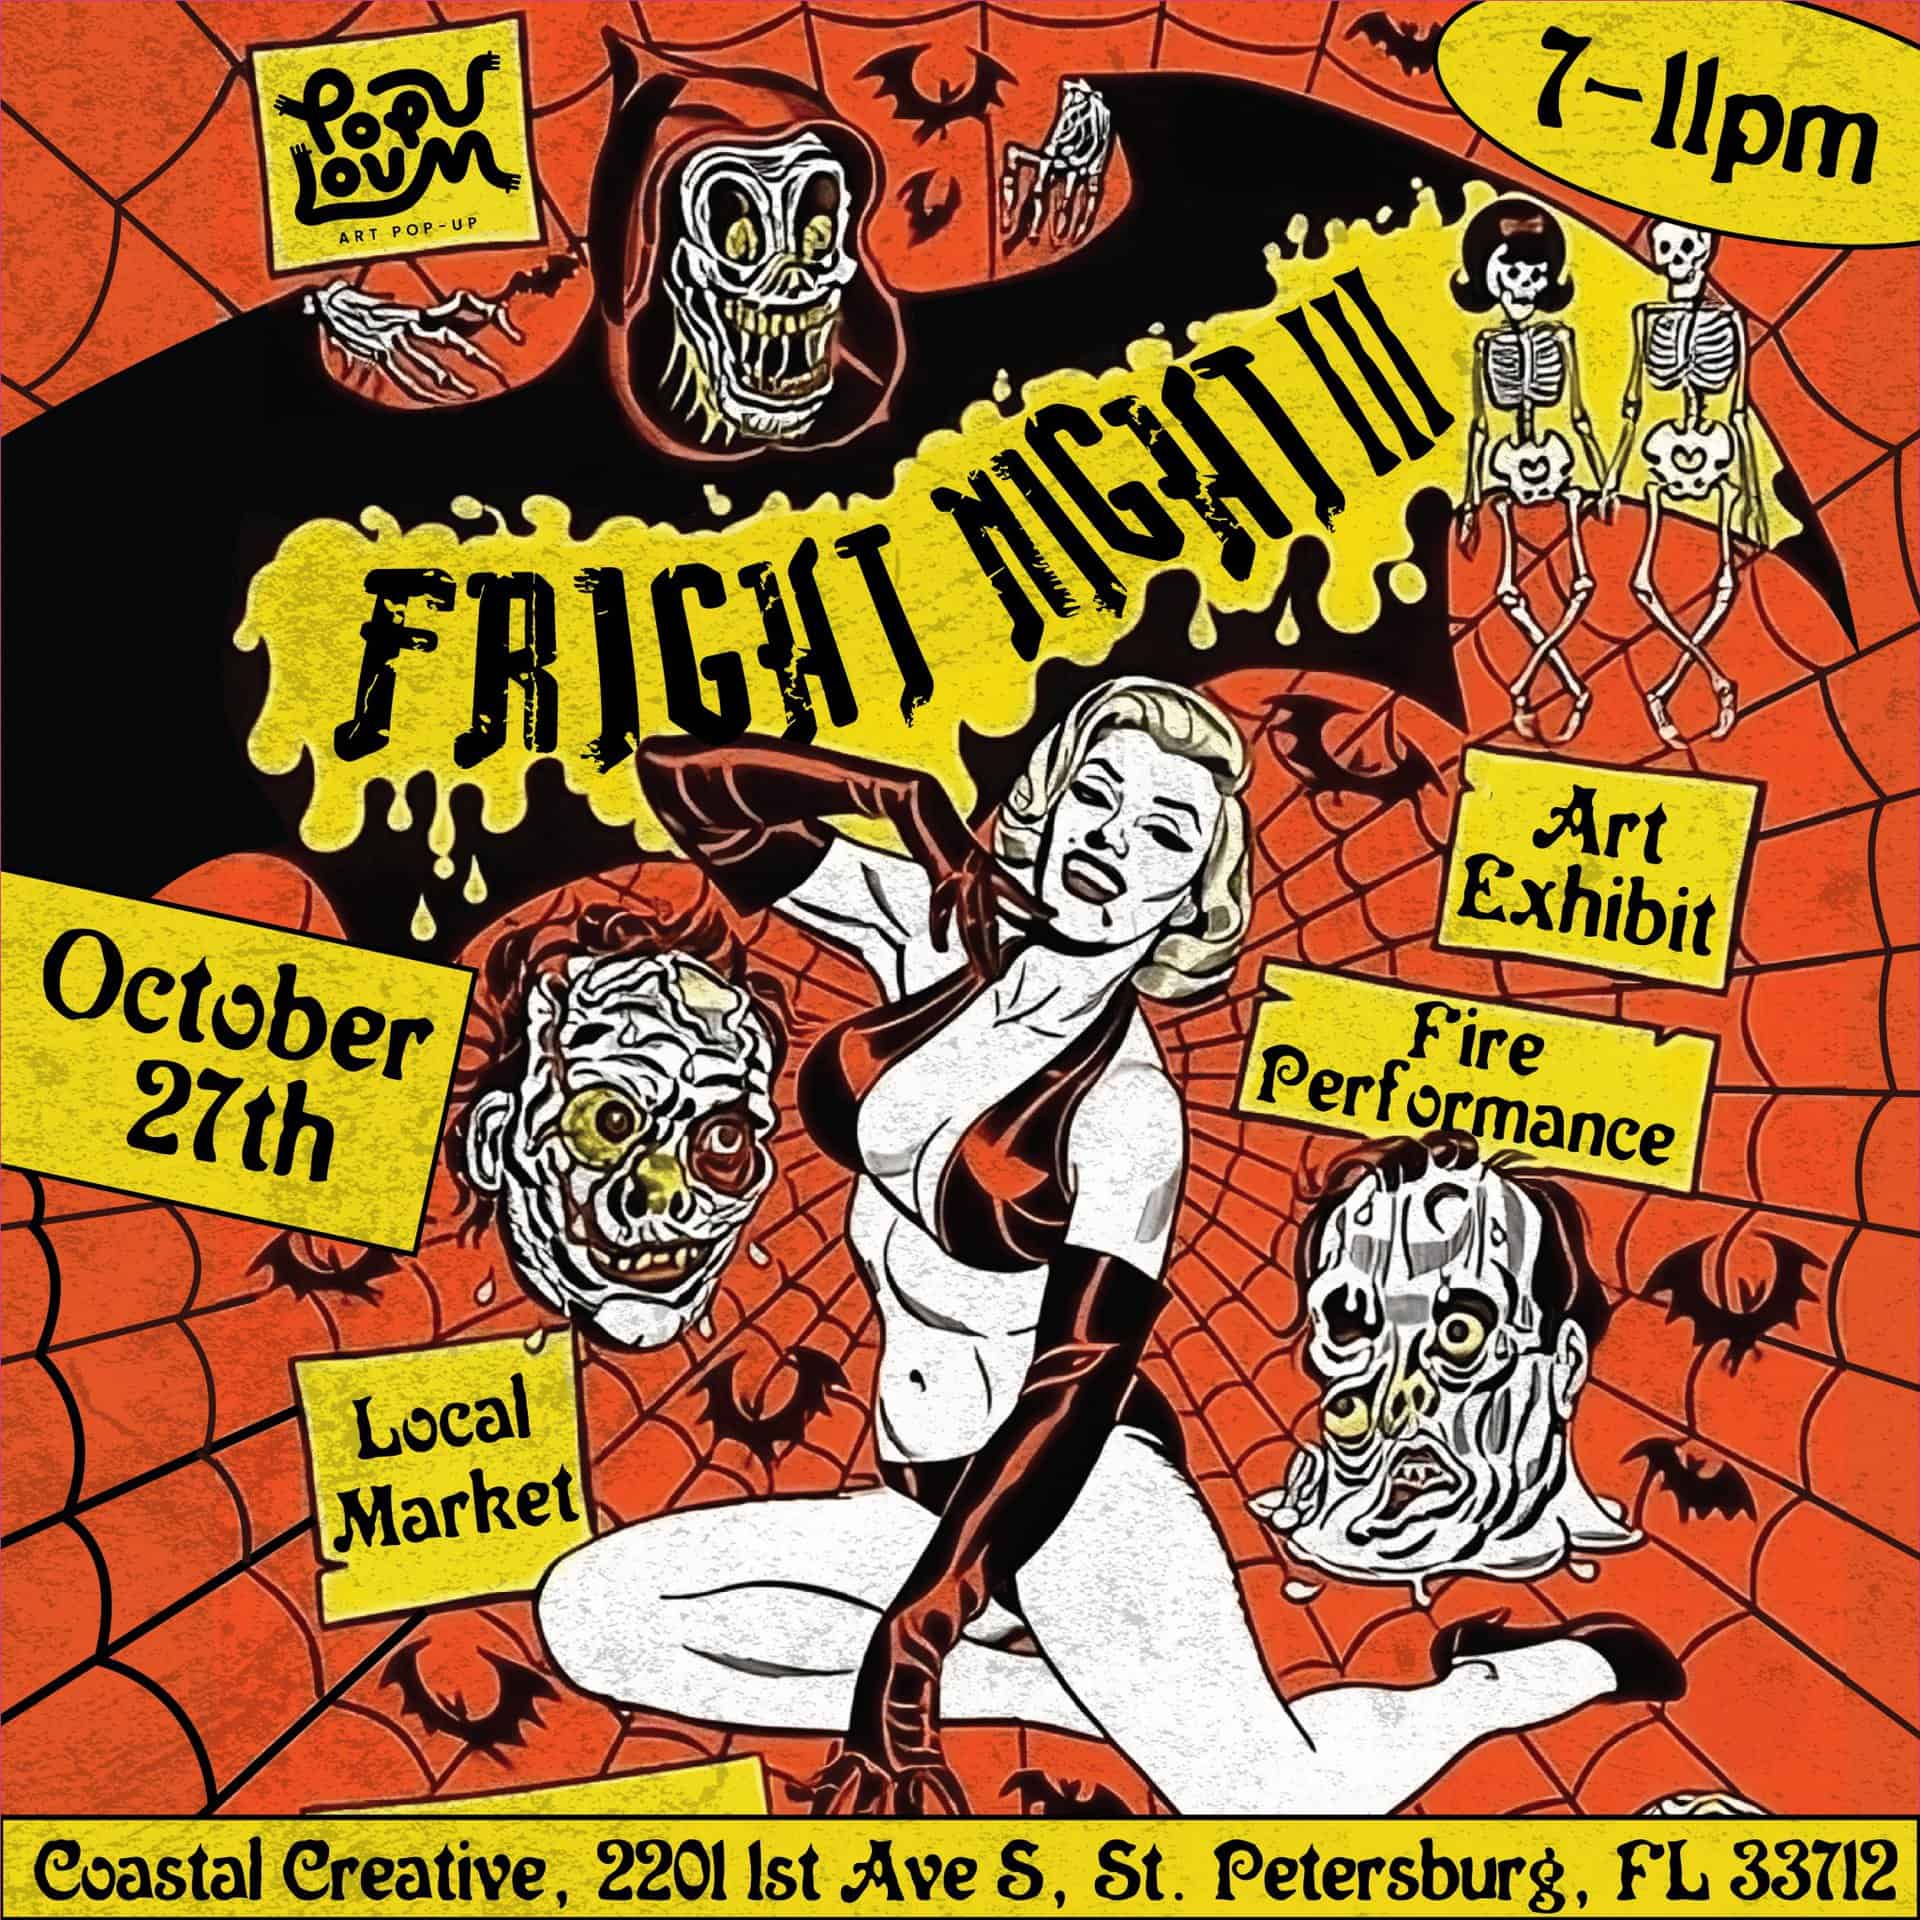 Fright Night III Art Show, Market and Fire Performance